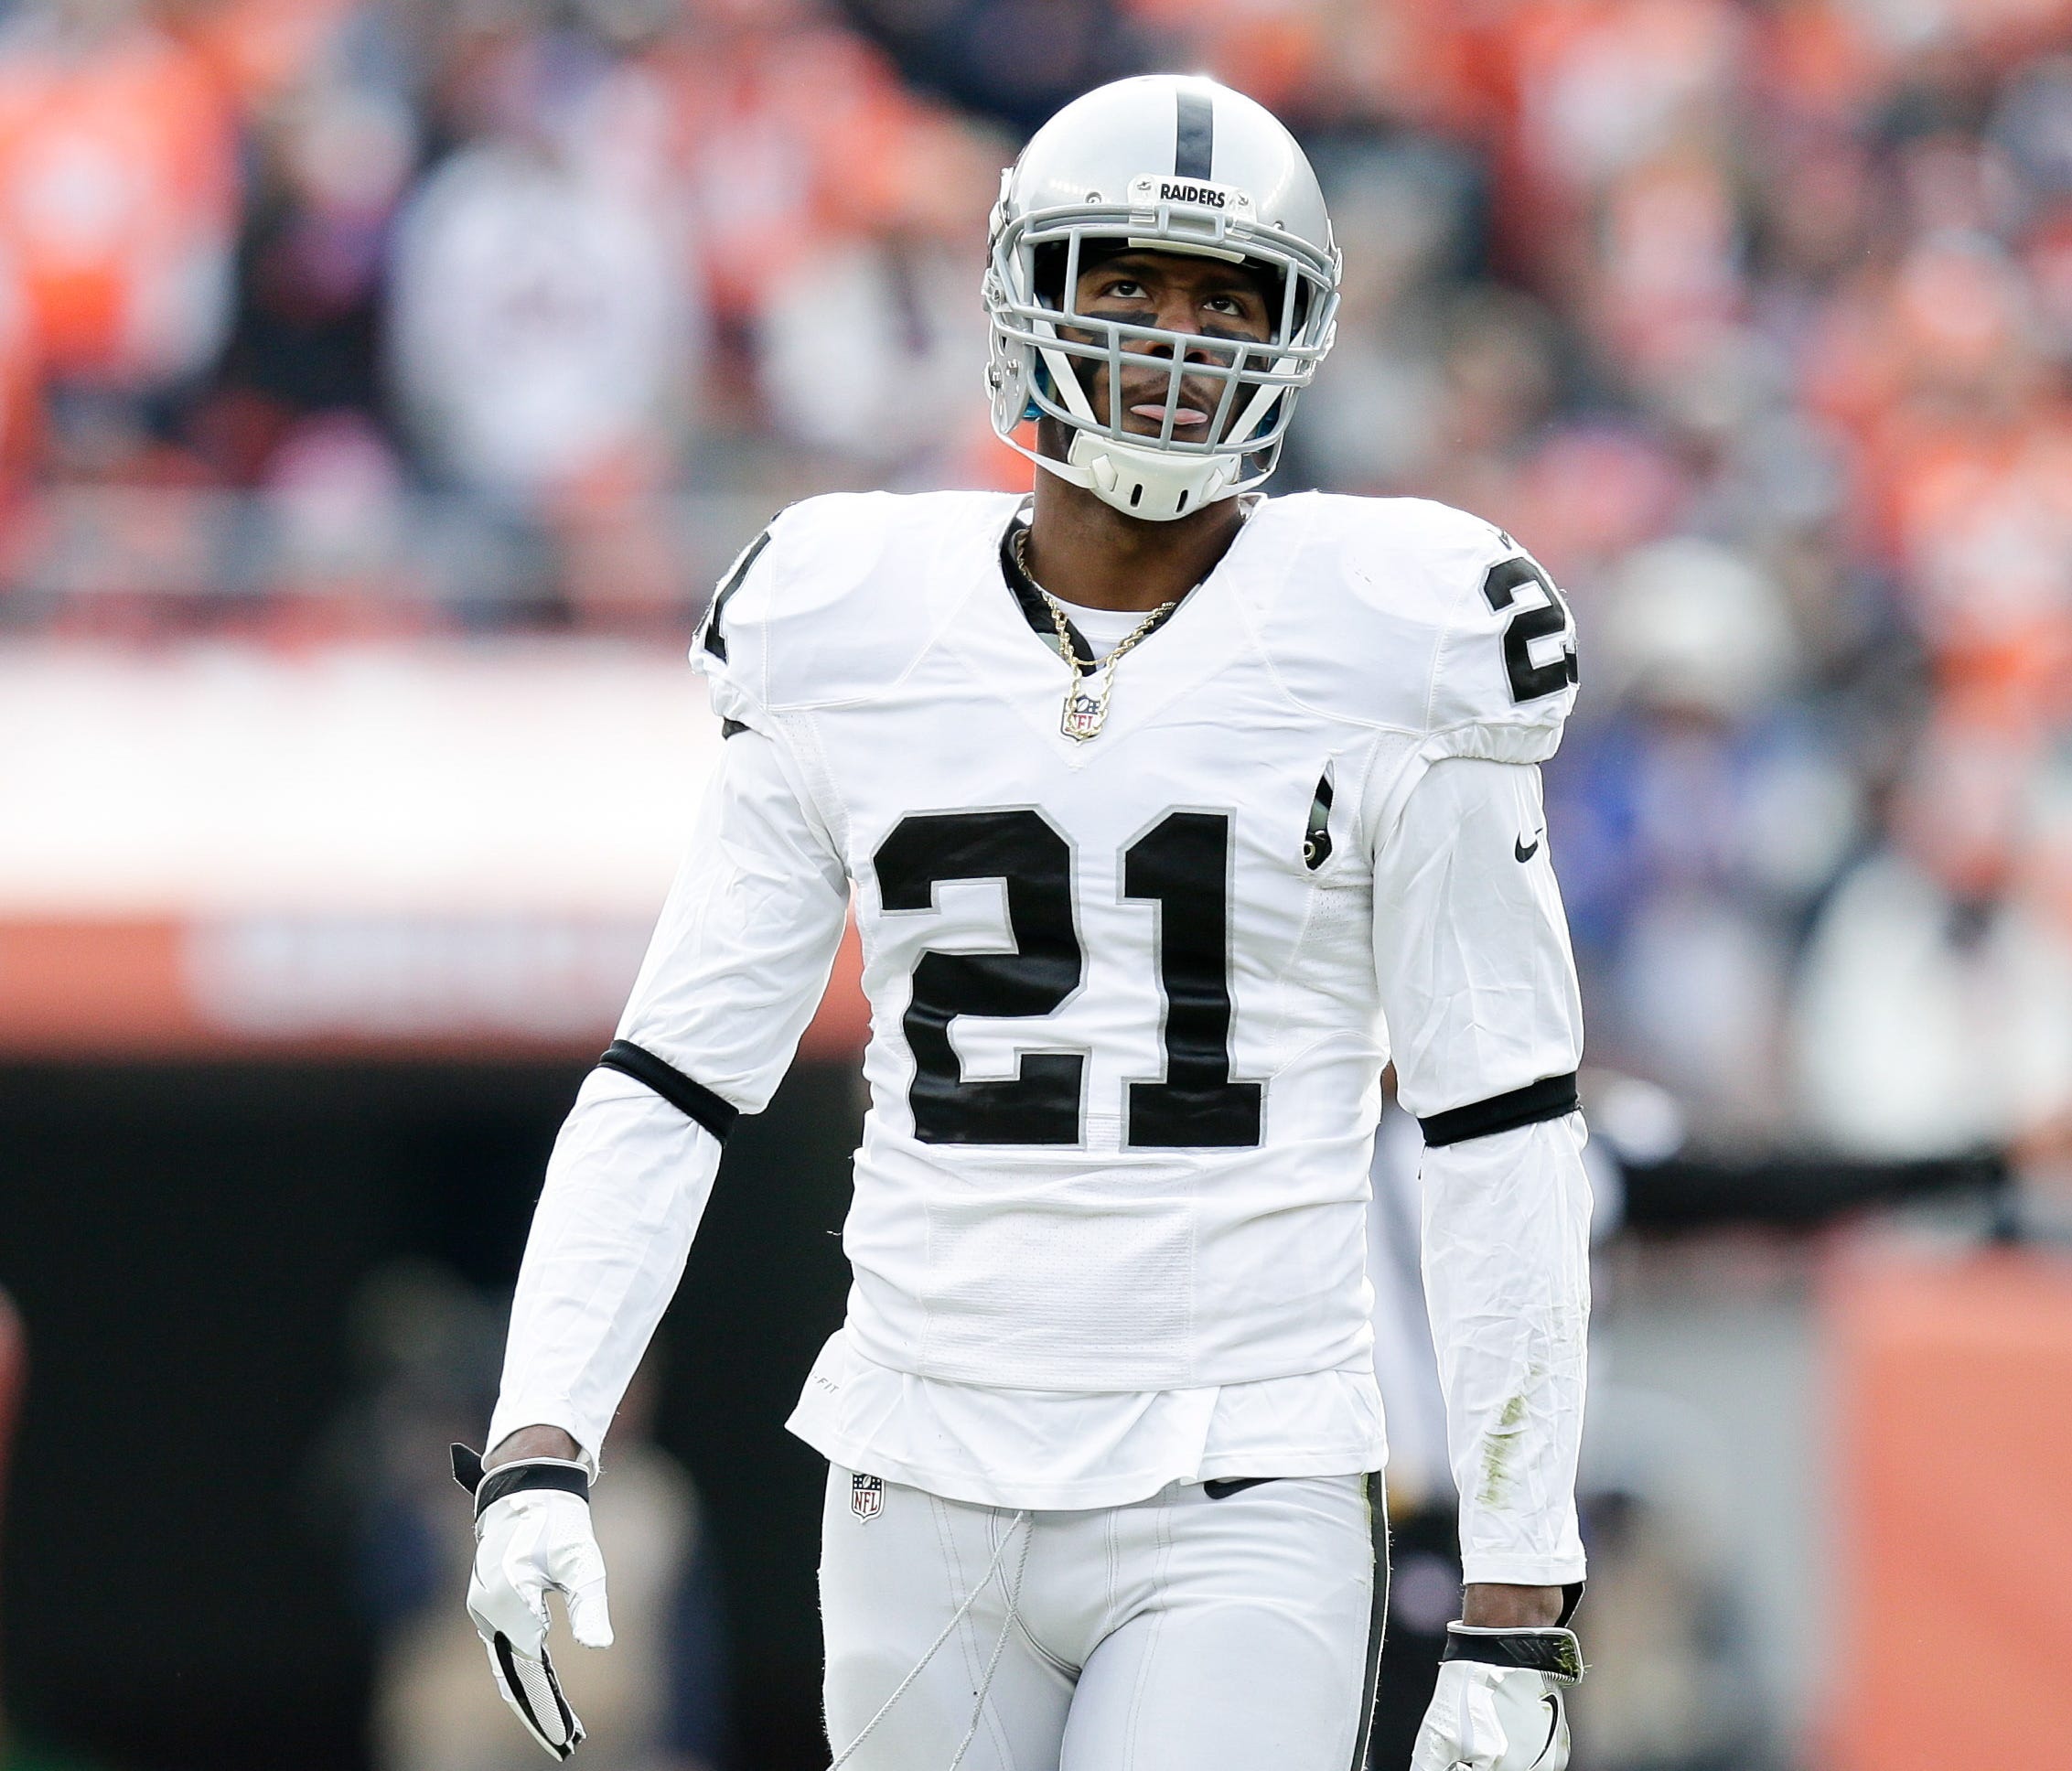 Oakland Raiders cornerback Sean Smith (21) in the first quarter against the Denver Broncos at Sports Authority Field at Mile High.